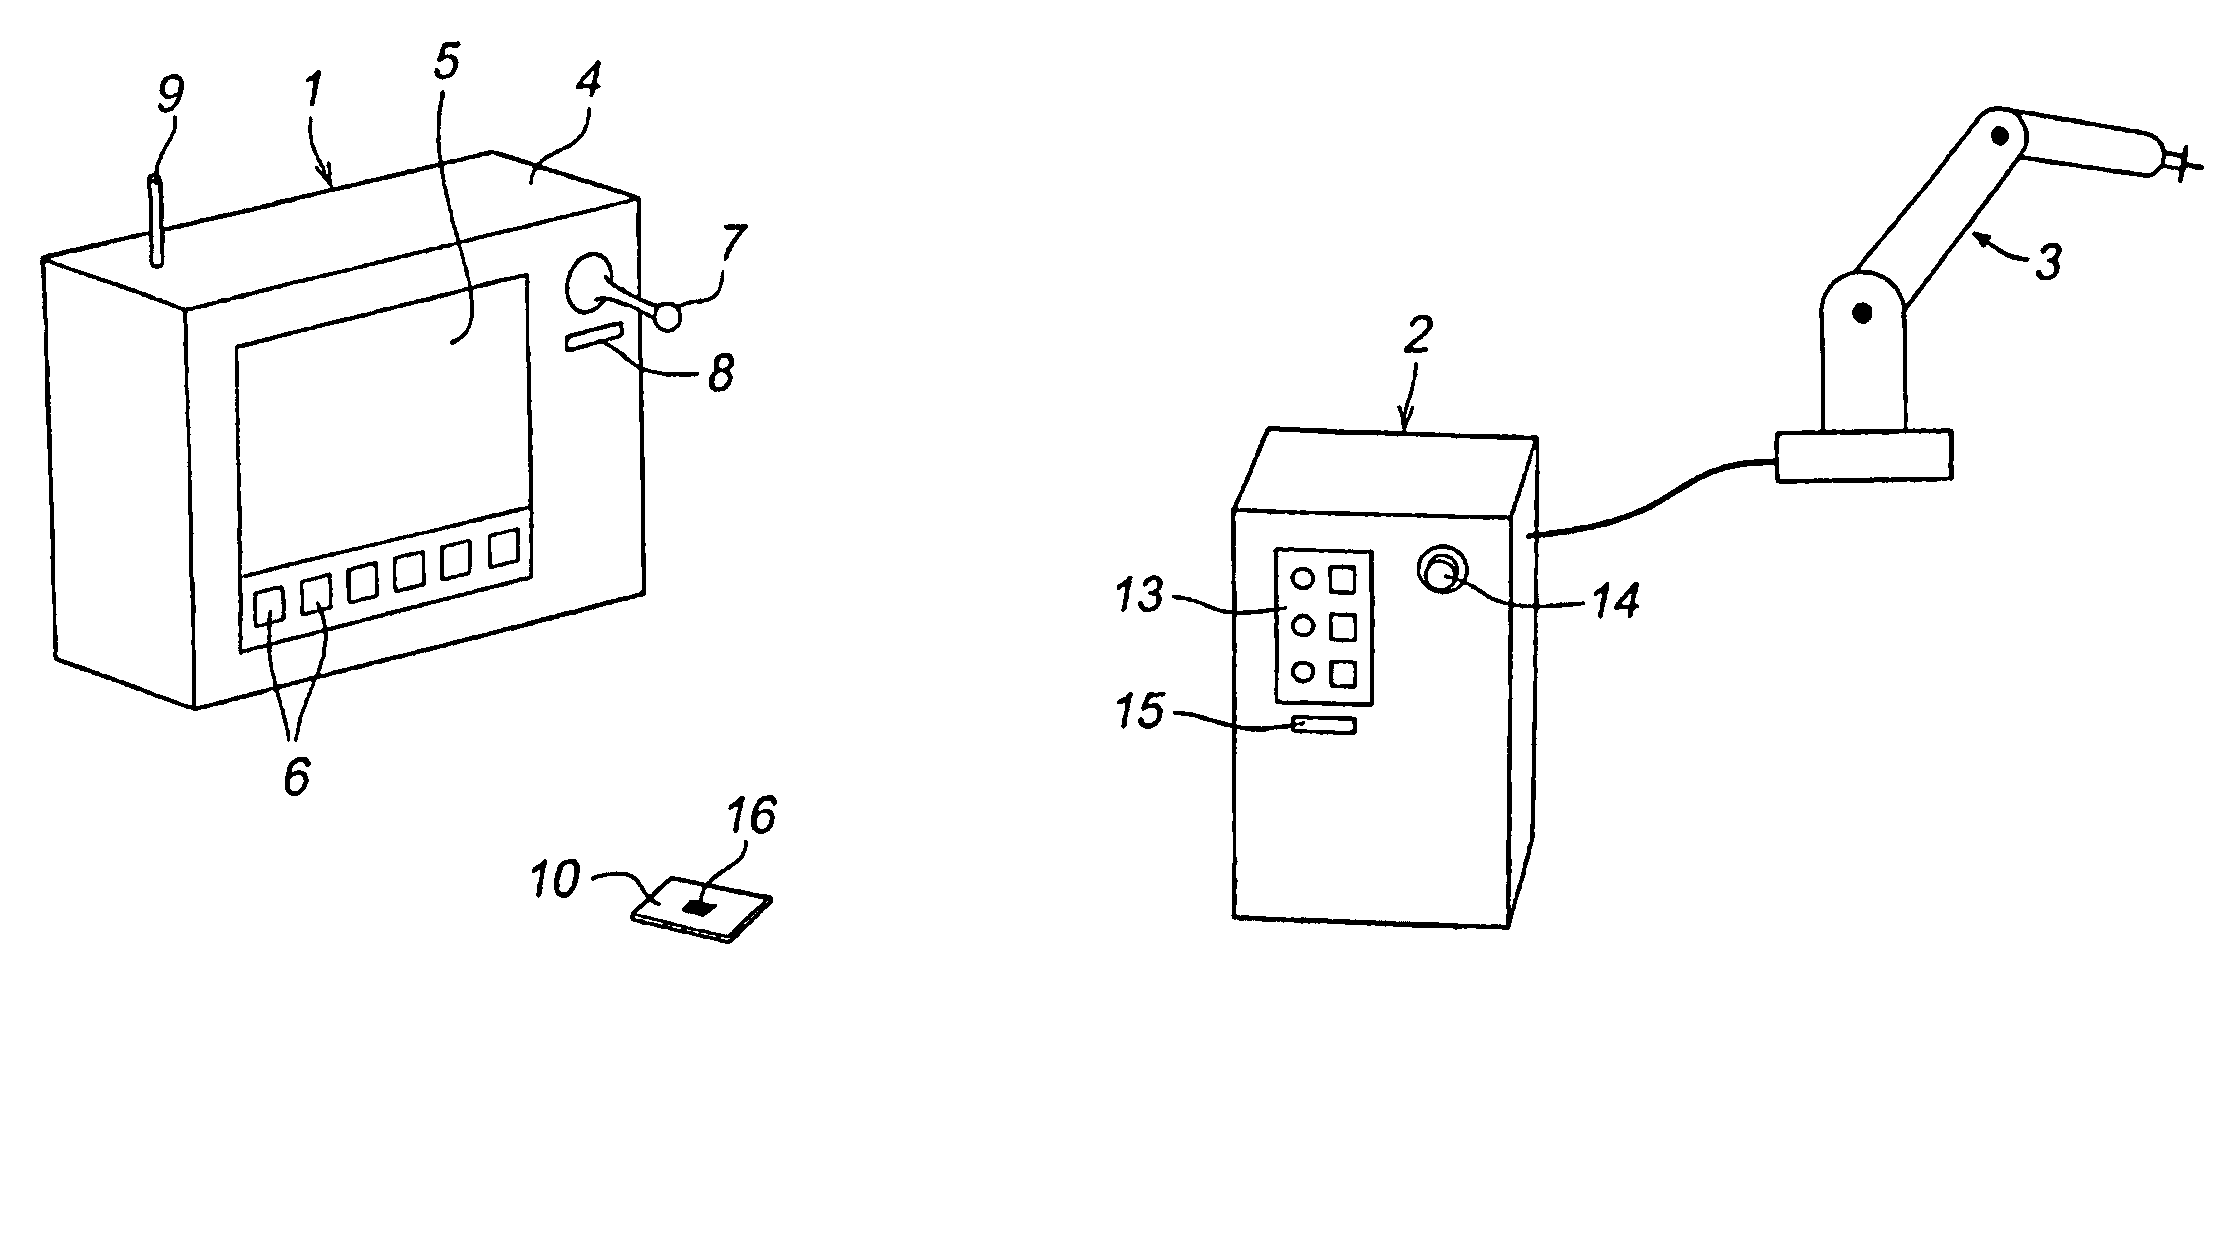 Industrial robot comprising a portable operating unit which a movable key device for identification of the robot